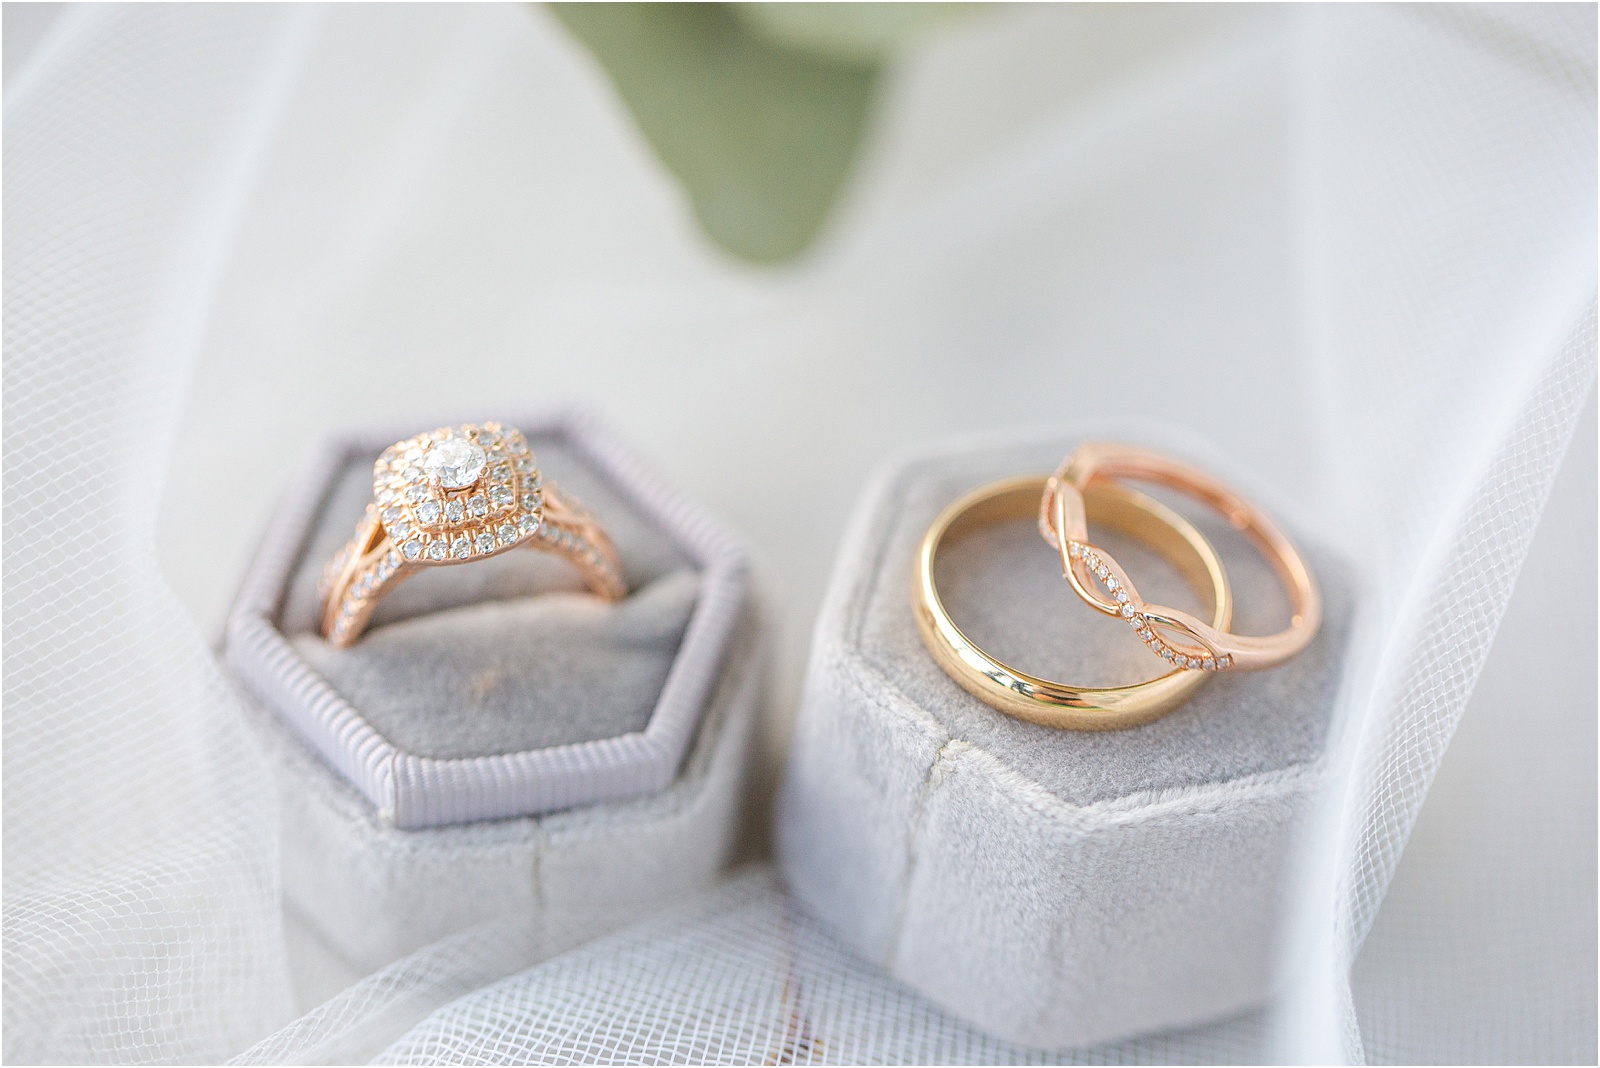 man and woman's wedding rings on grey ring boxes